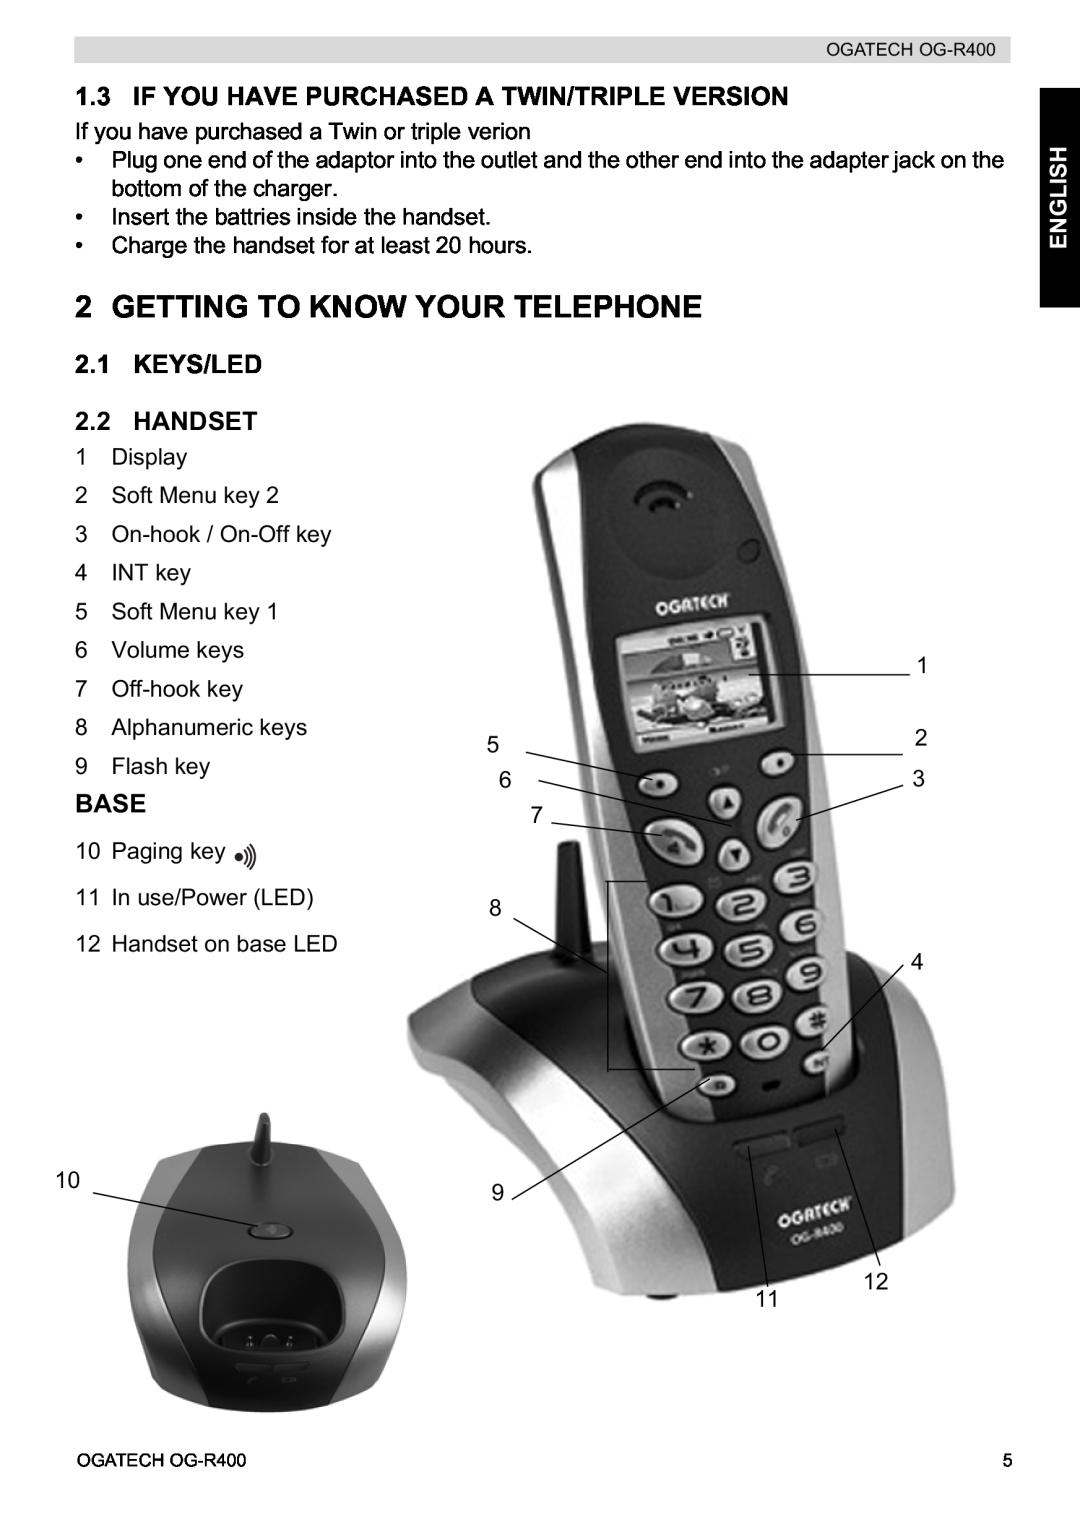 Topcom OG-R400 Getting To Know Your Telephone, If You Have Purchased A Twin/Triple Version, KEYS/LED 2.2 HANDSET, Base 